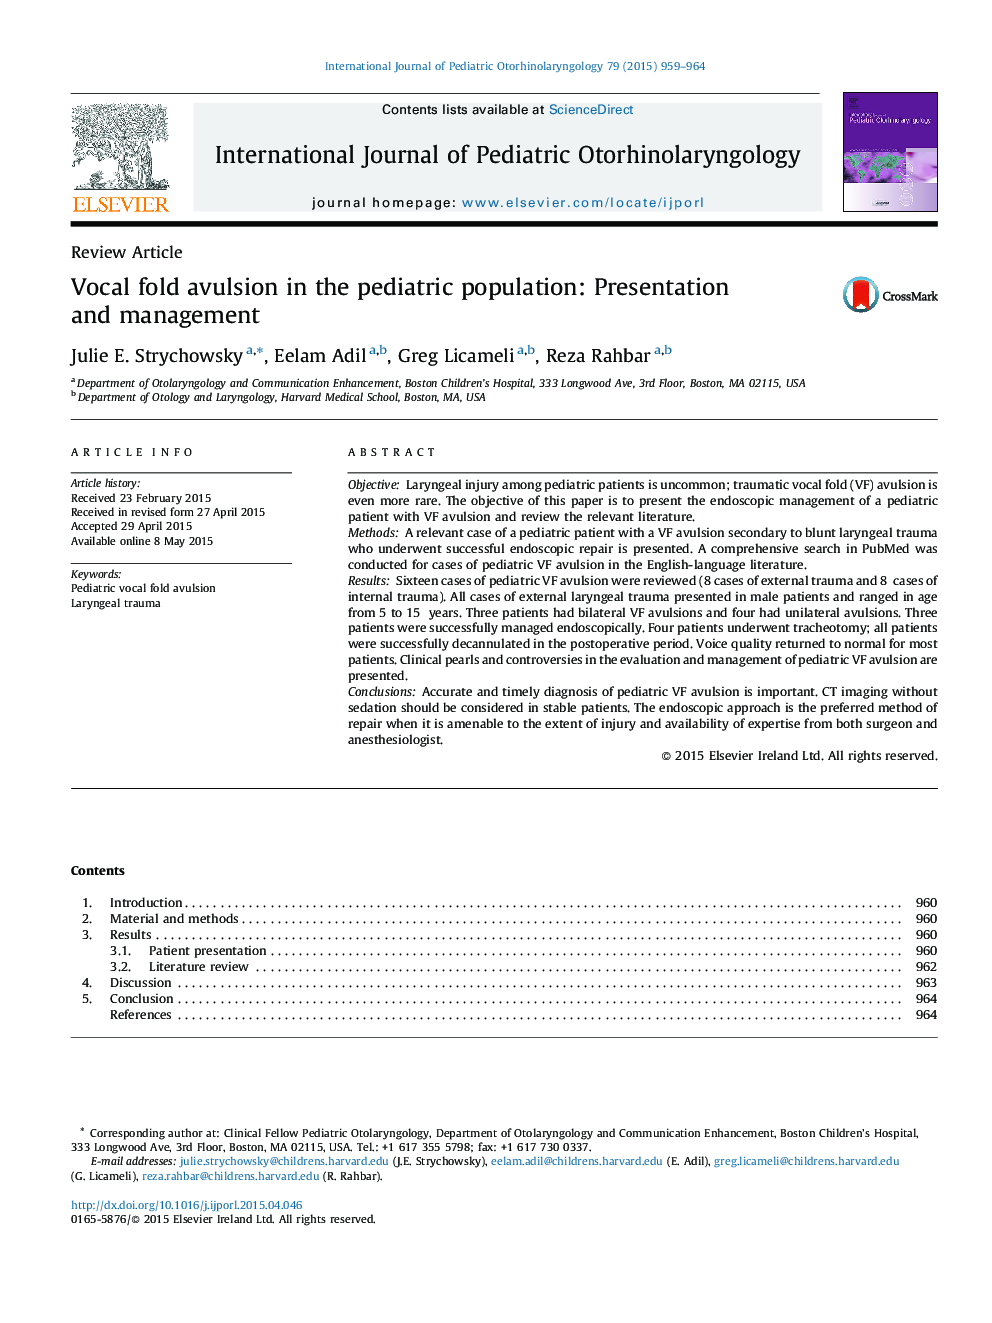 Vocal fold avulsion in the pediatric population: Presentation and management